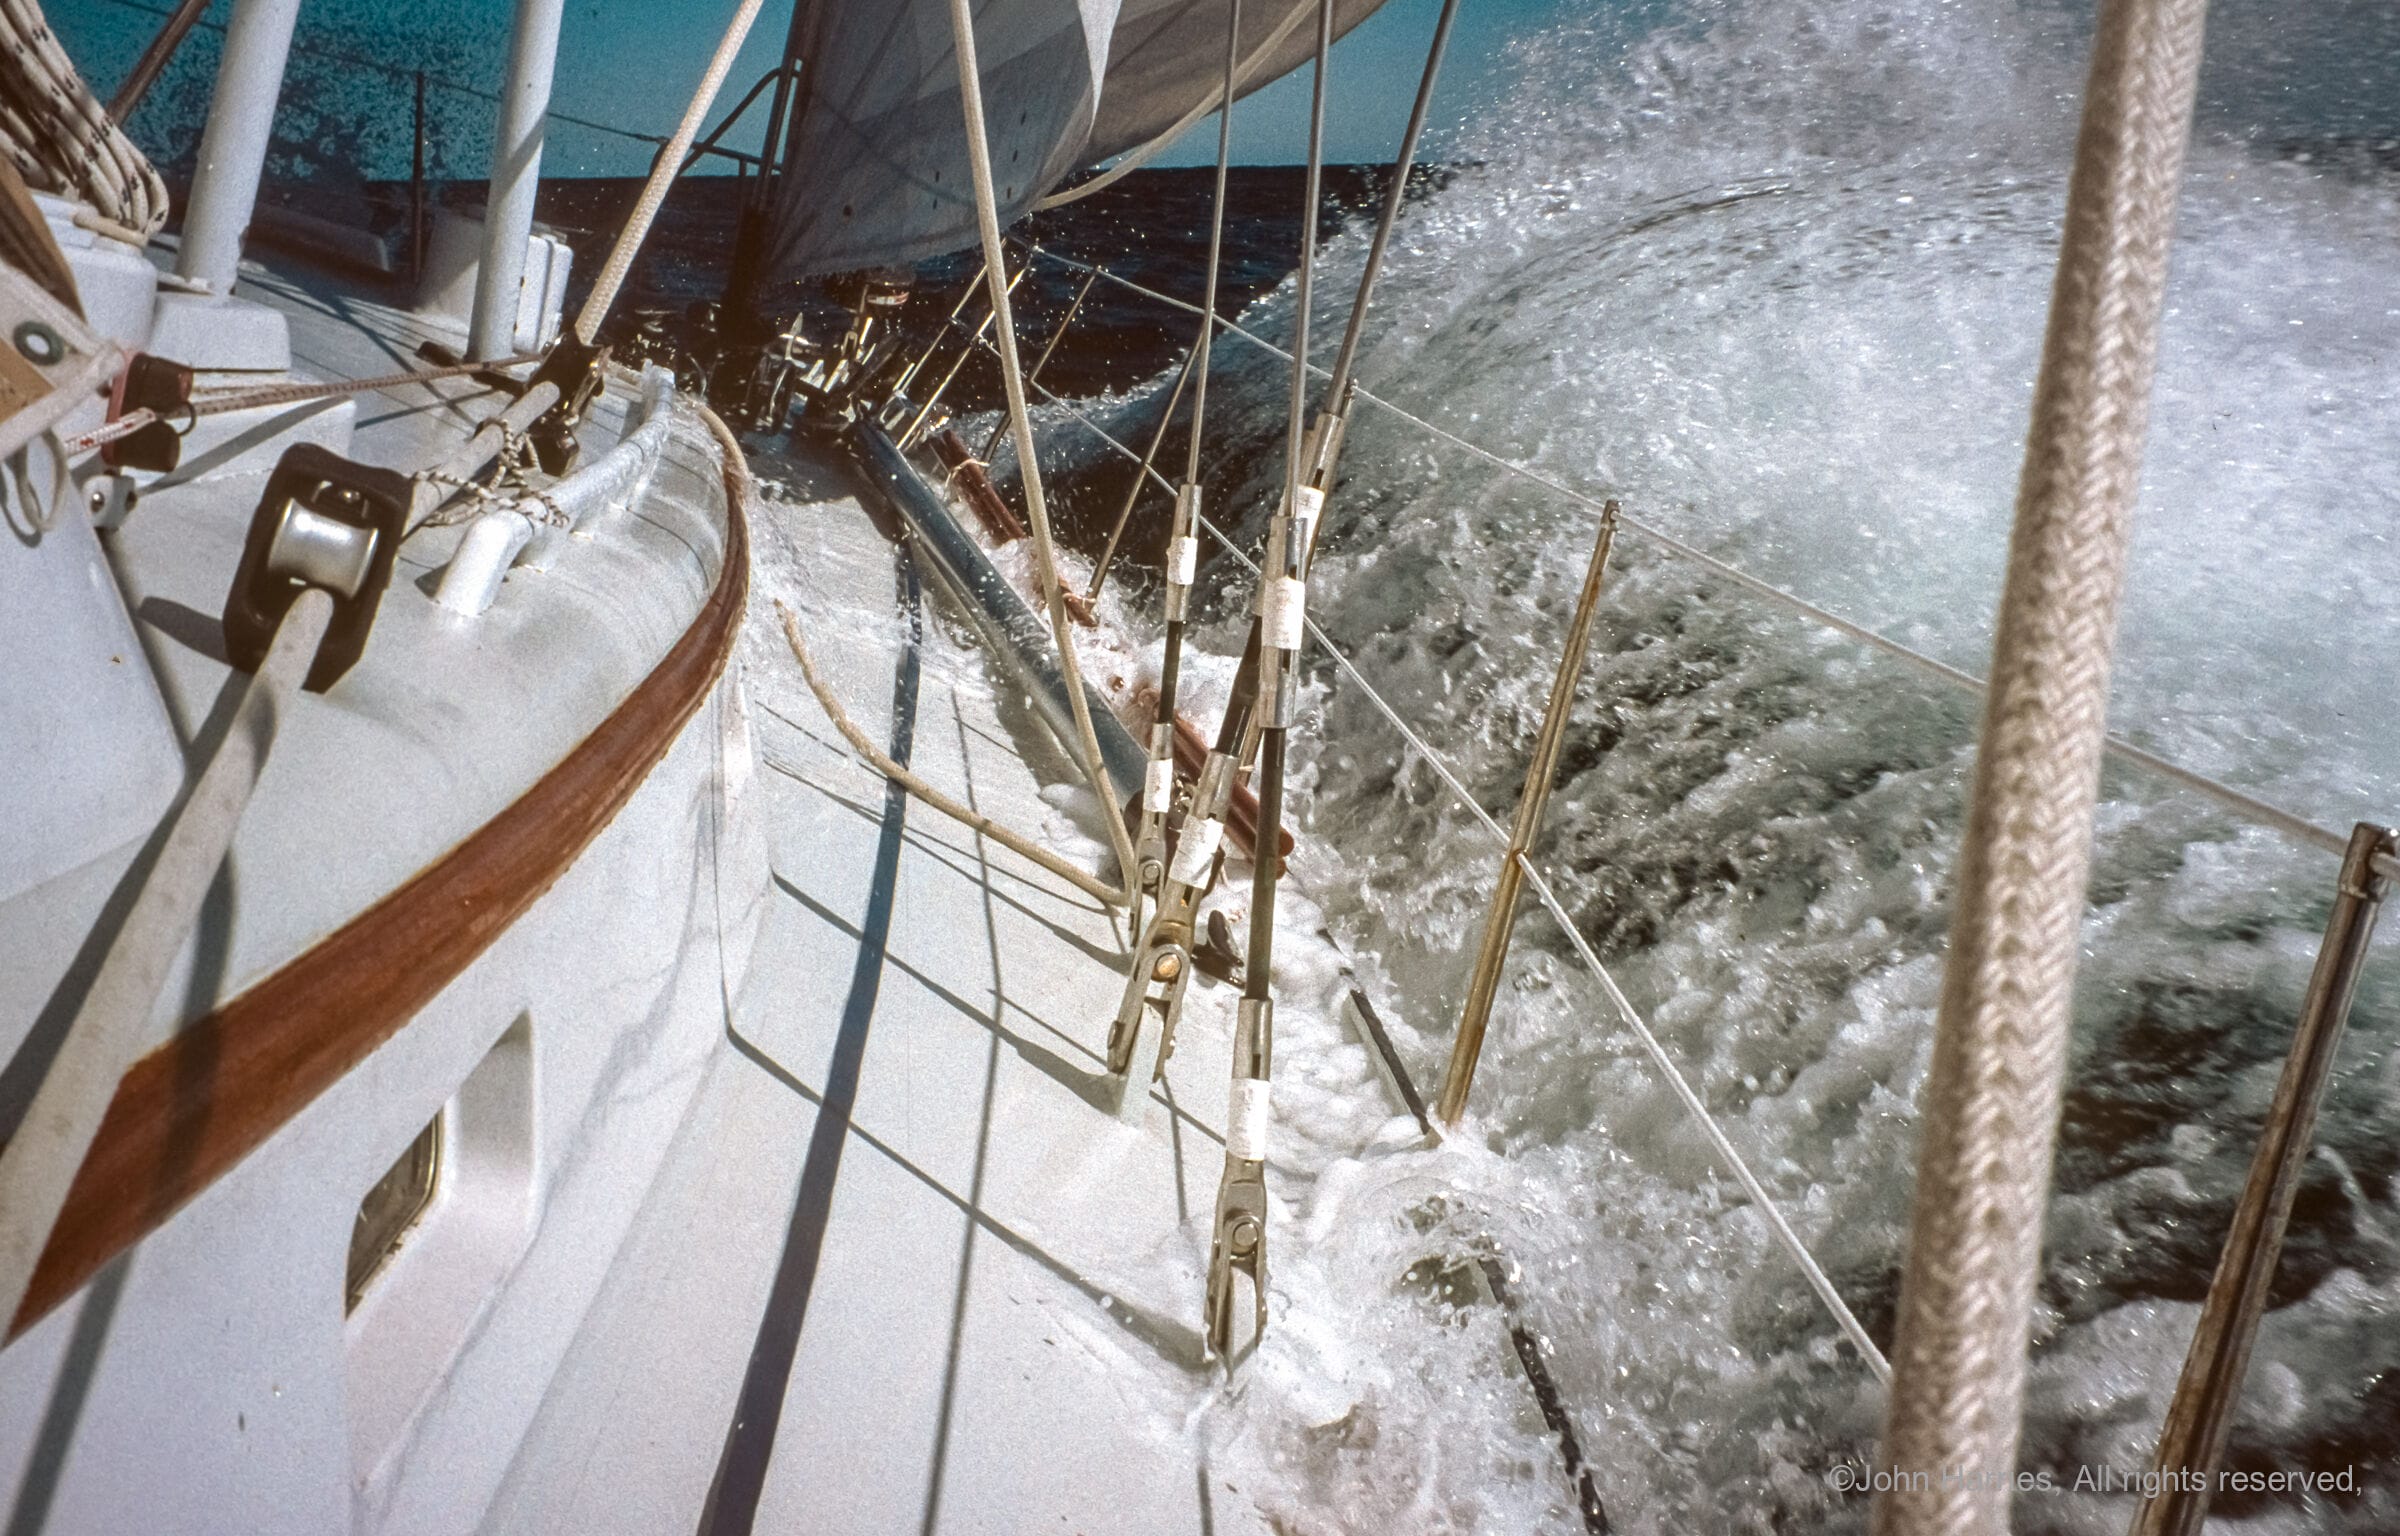 12 Tips To Avoid Ruining Our Easily Driven Sailboat